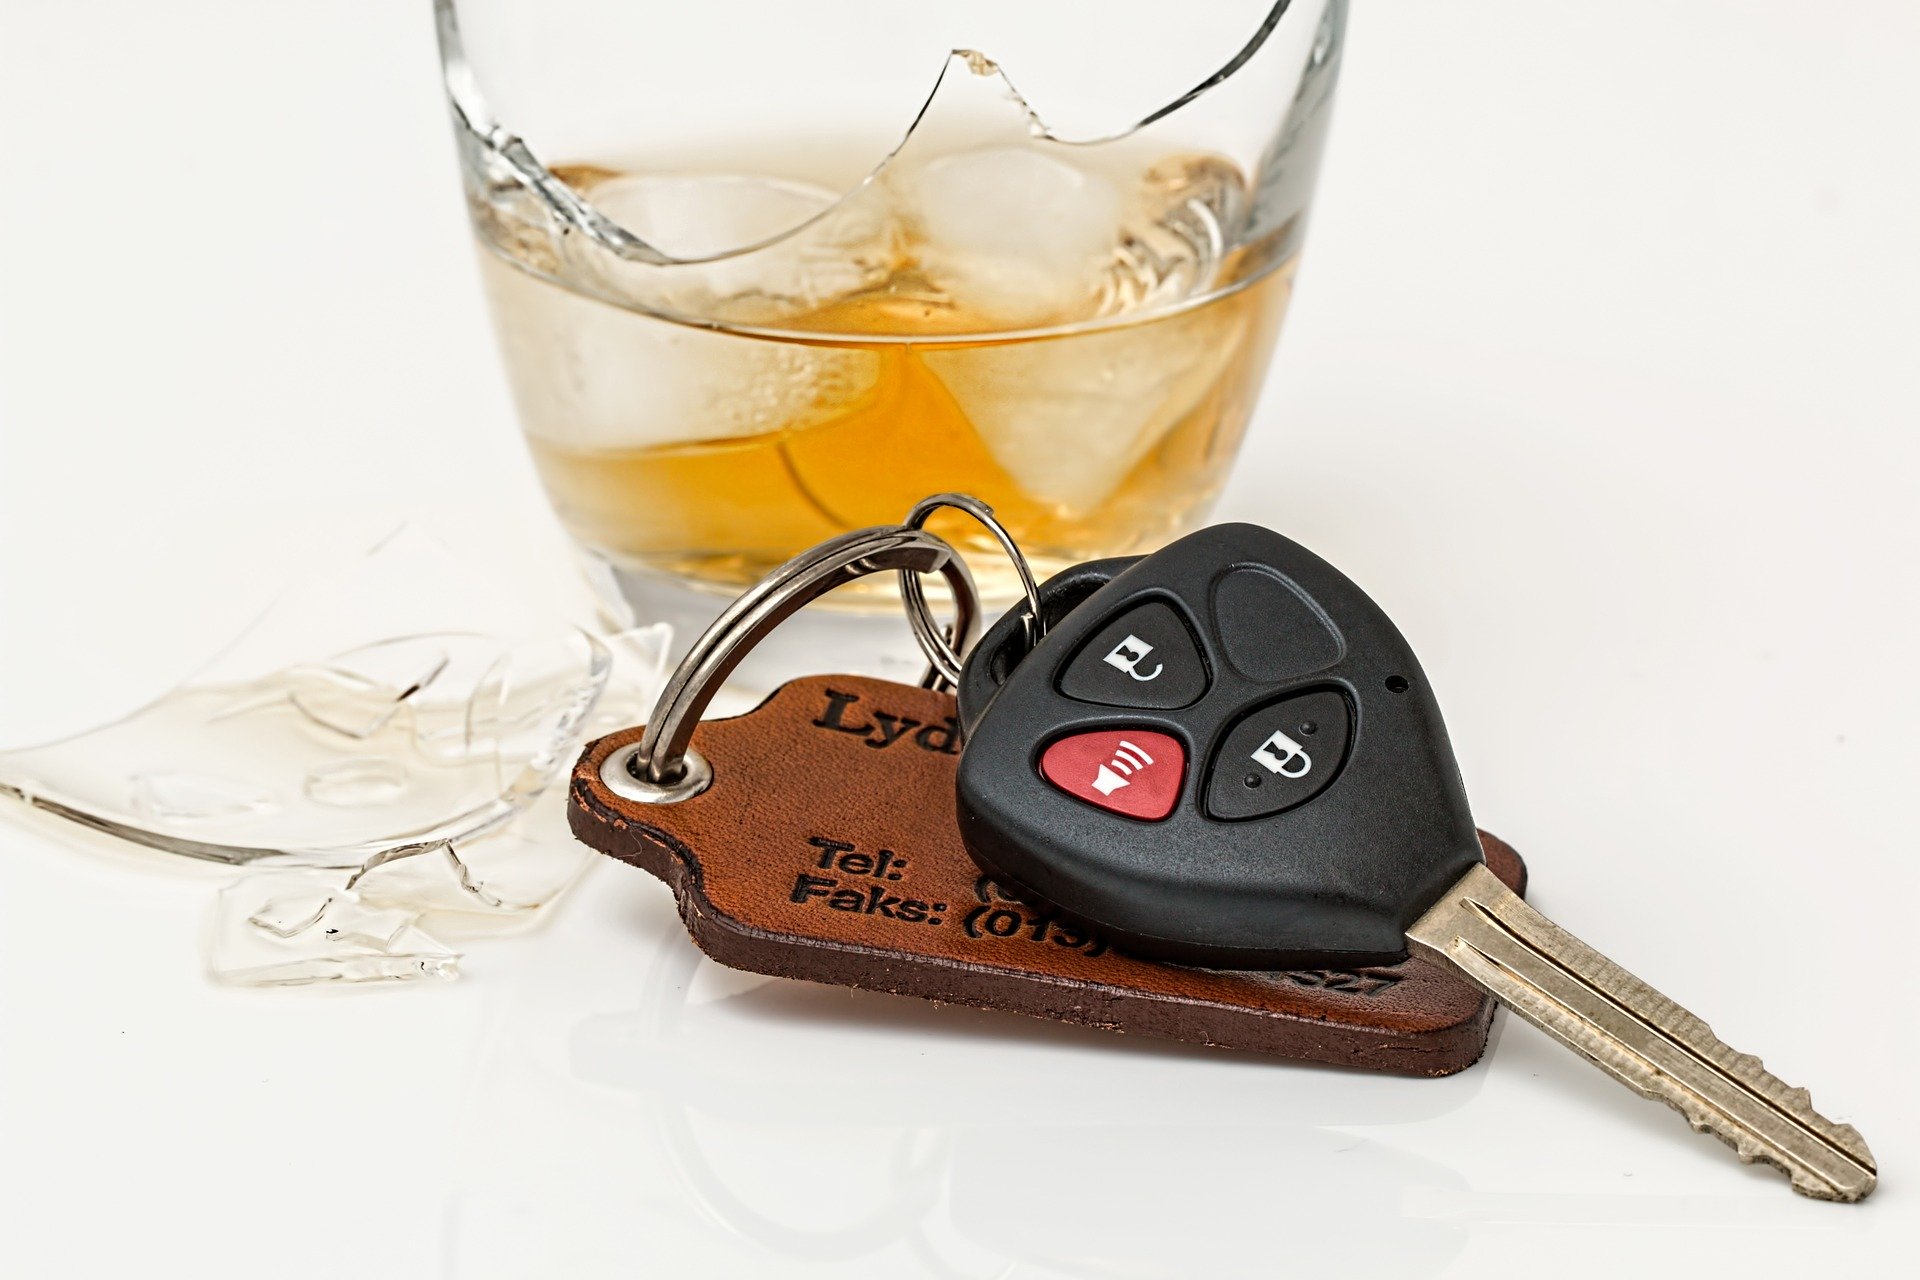 dwi charge new jersey